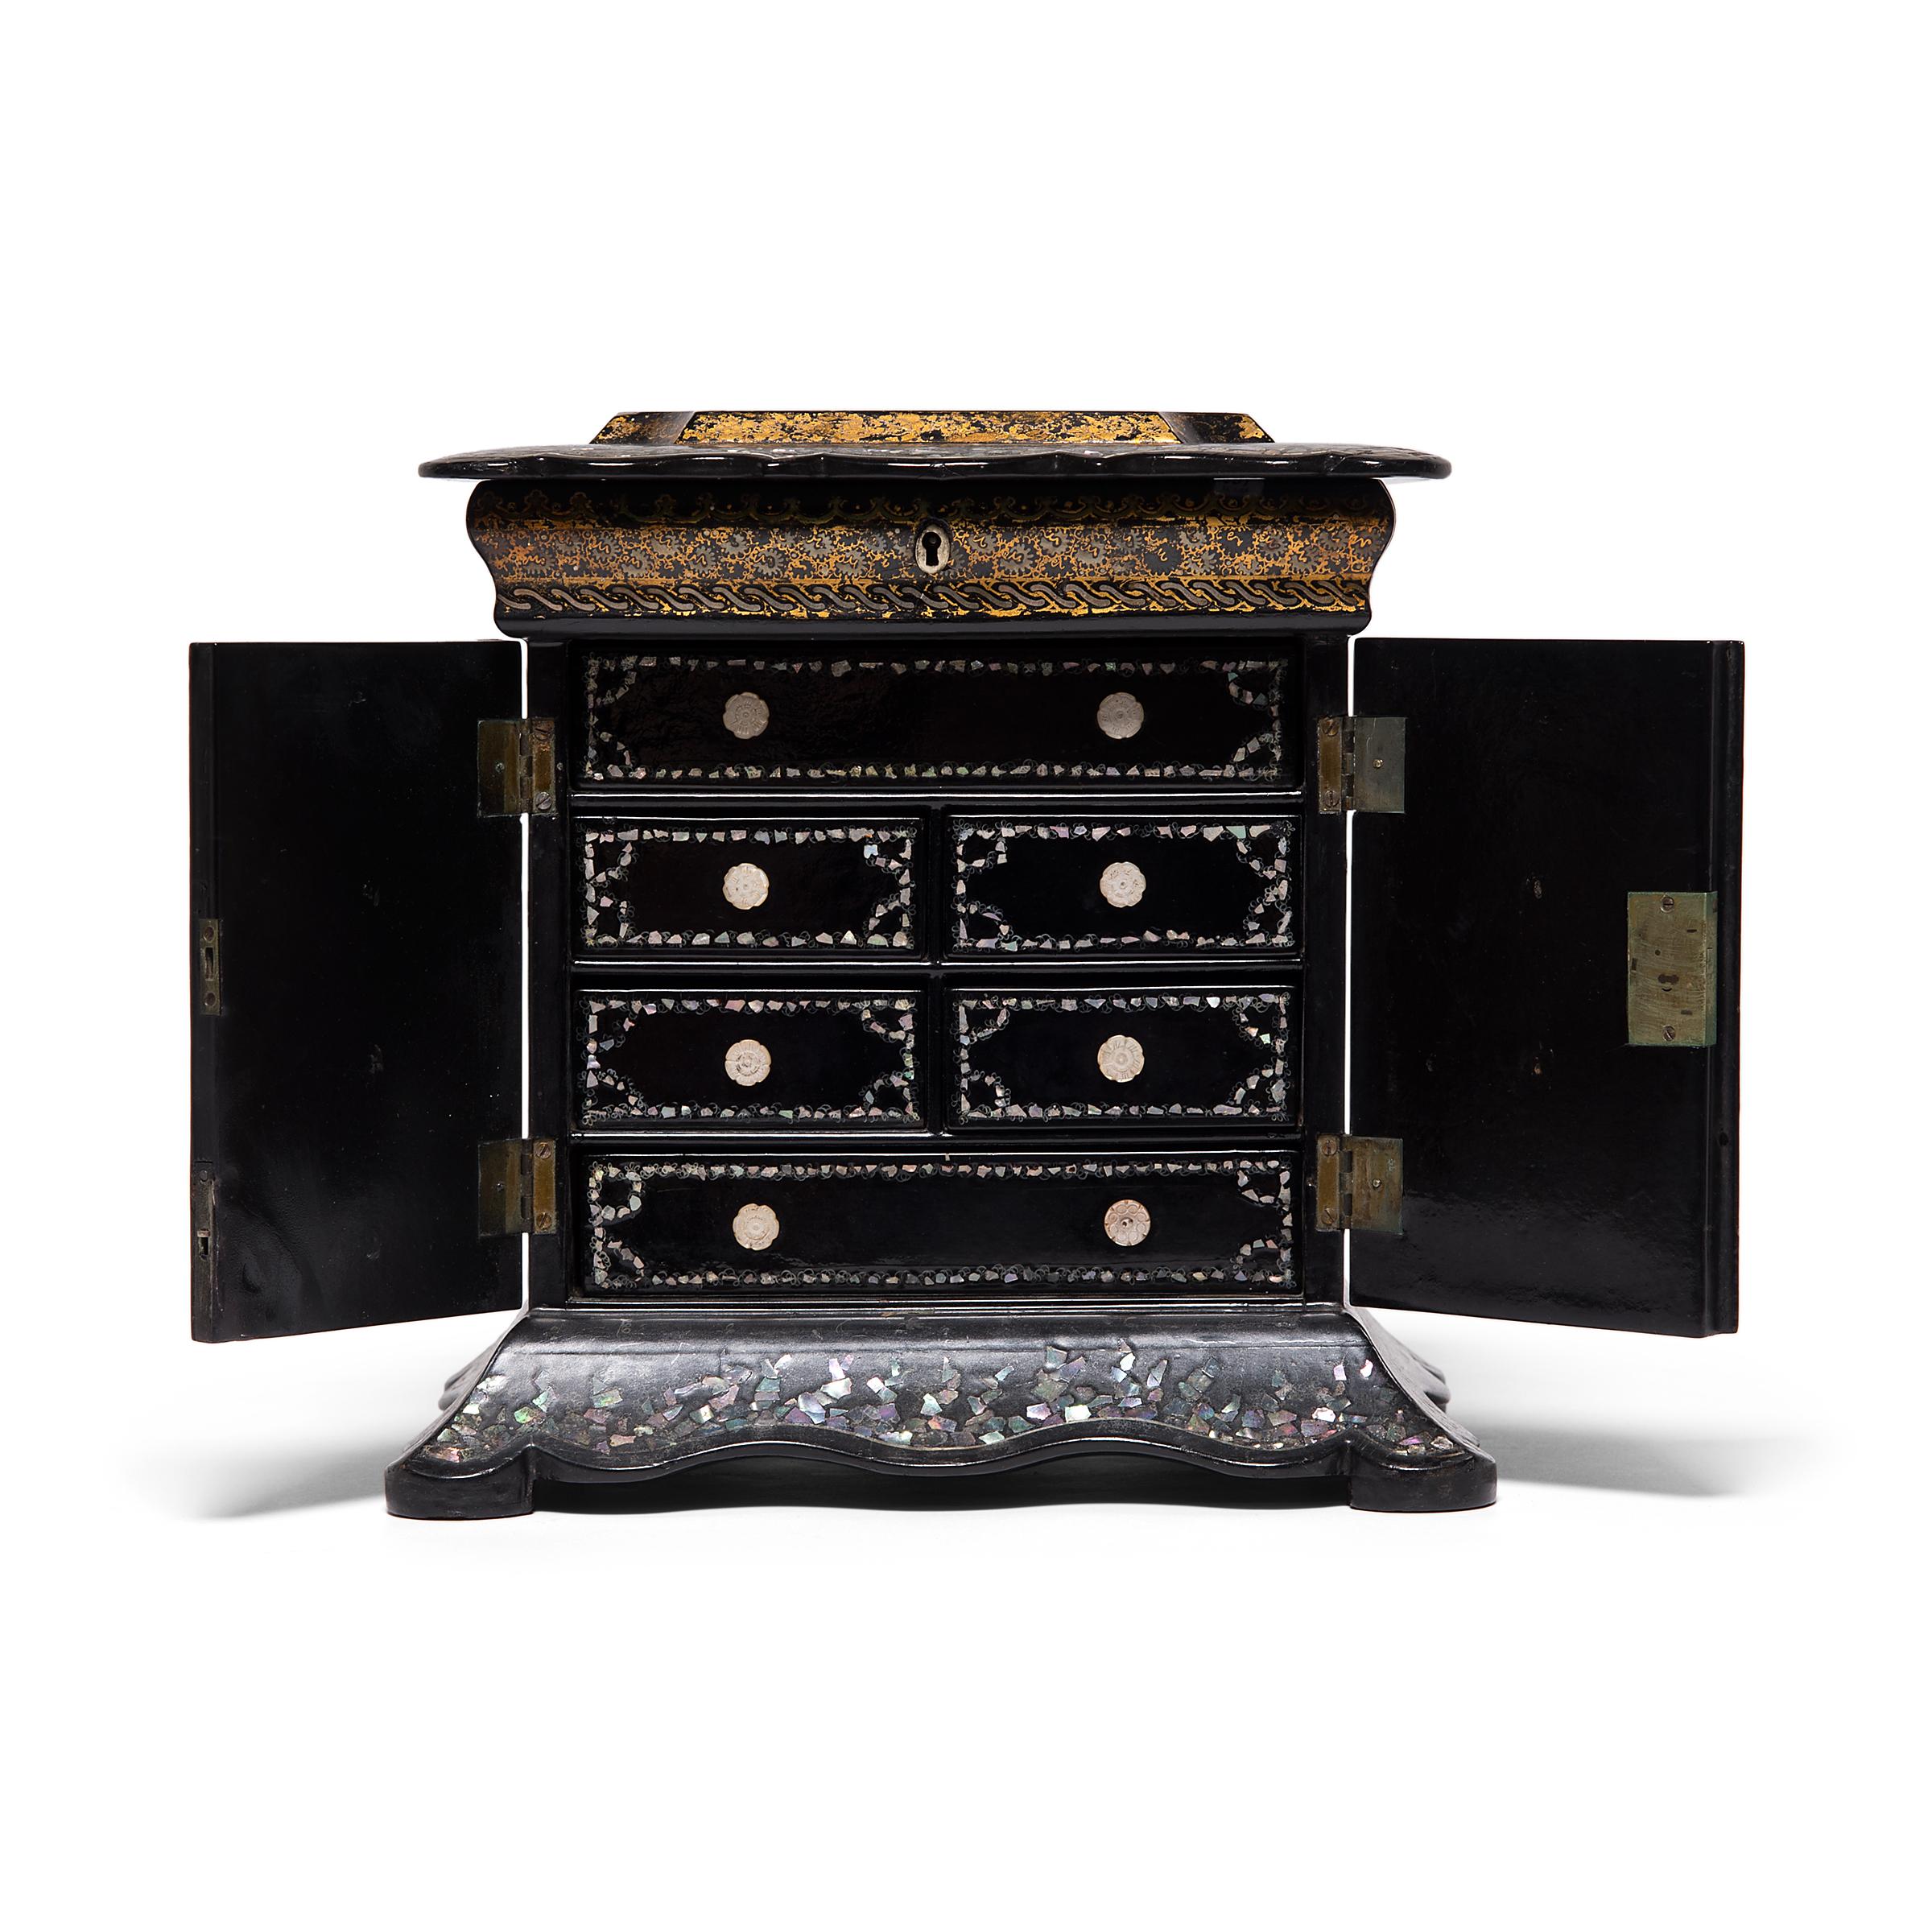 This precious 19th century English table casket features mother of pearl inlay and carved shell drawer pulls. The top of the piece is decorated with a painted landscape and Gothic church, incorporating mother of pearl to create a whimsical scene.